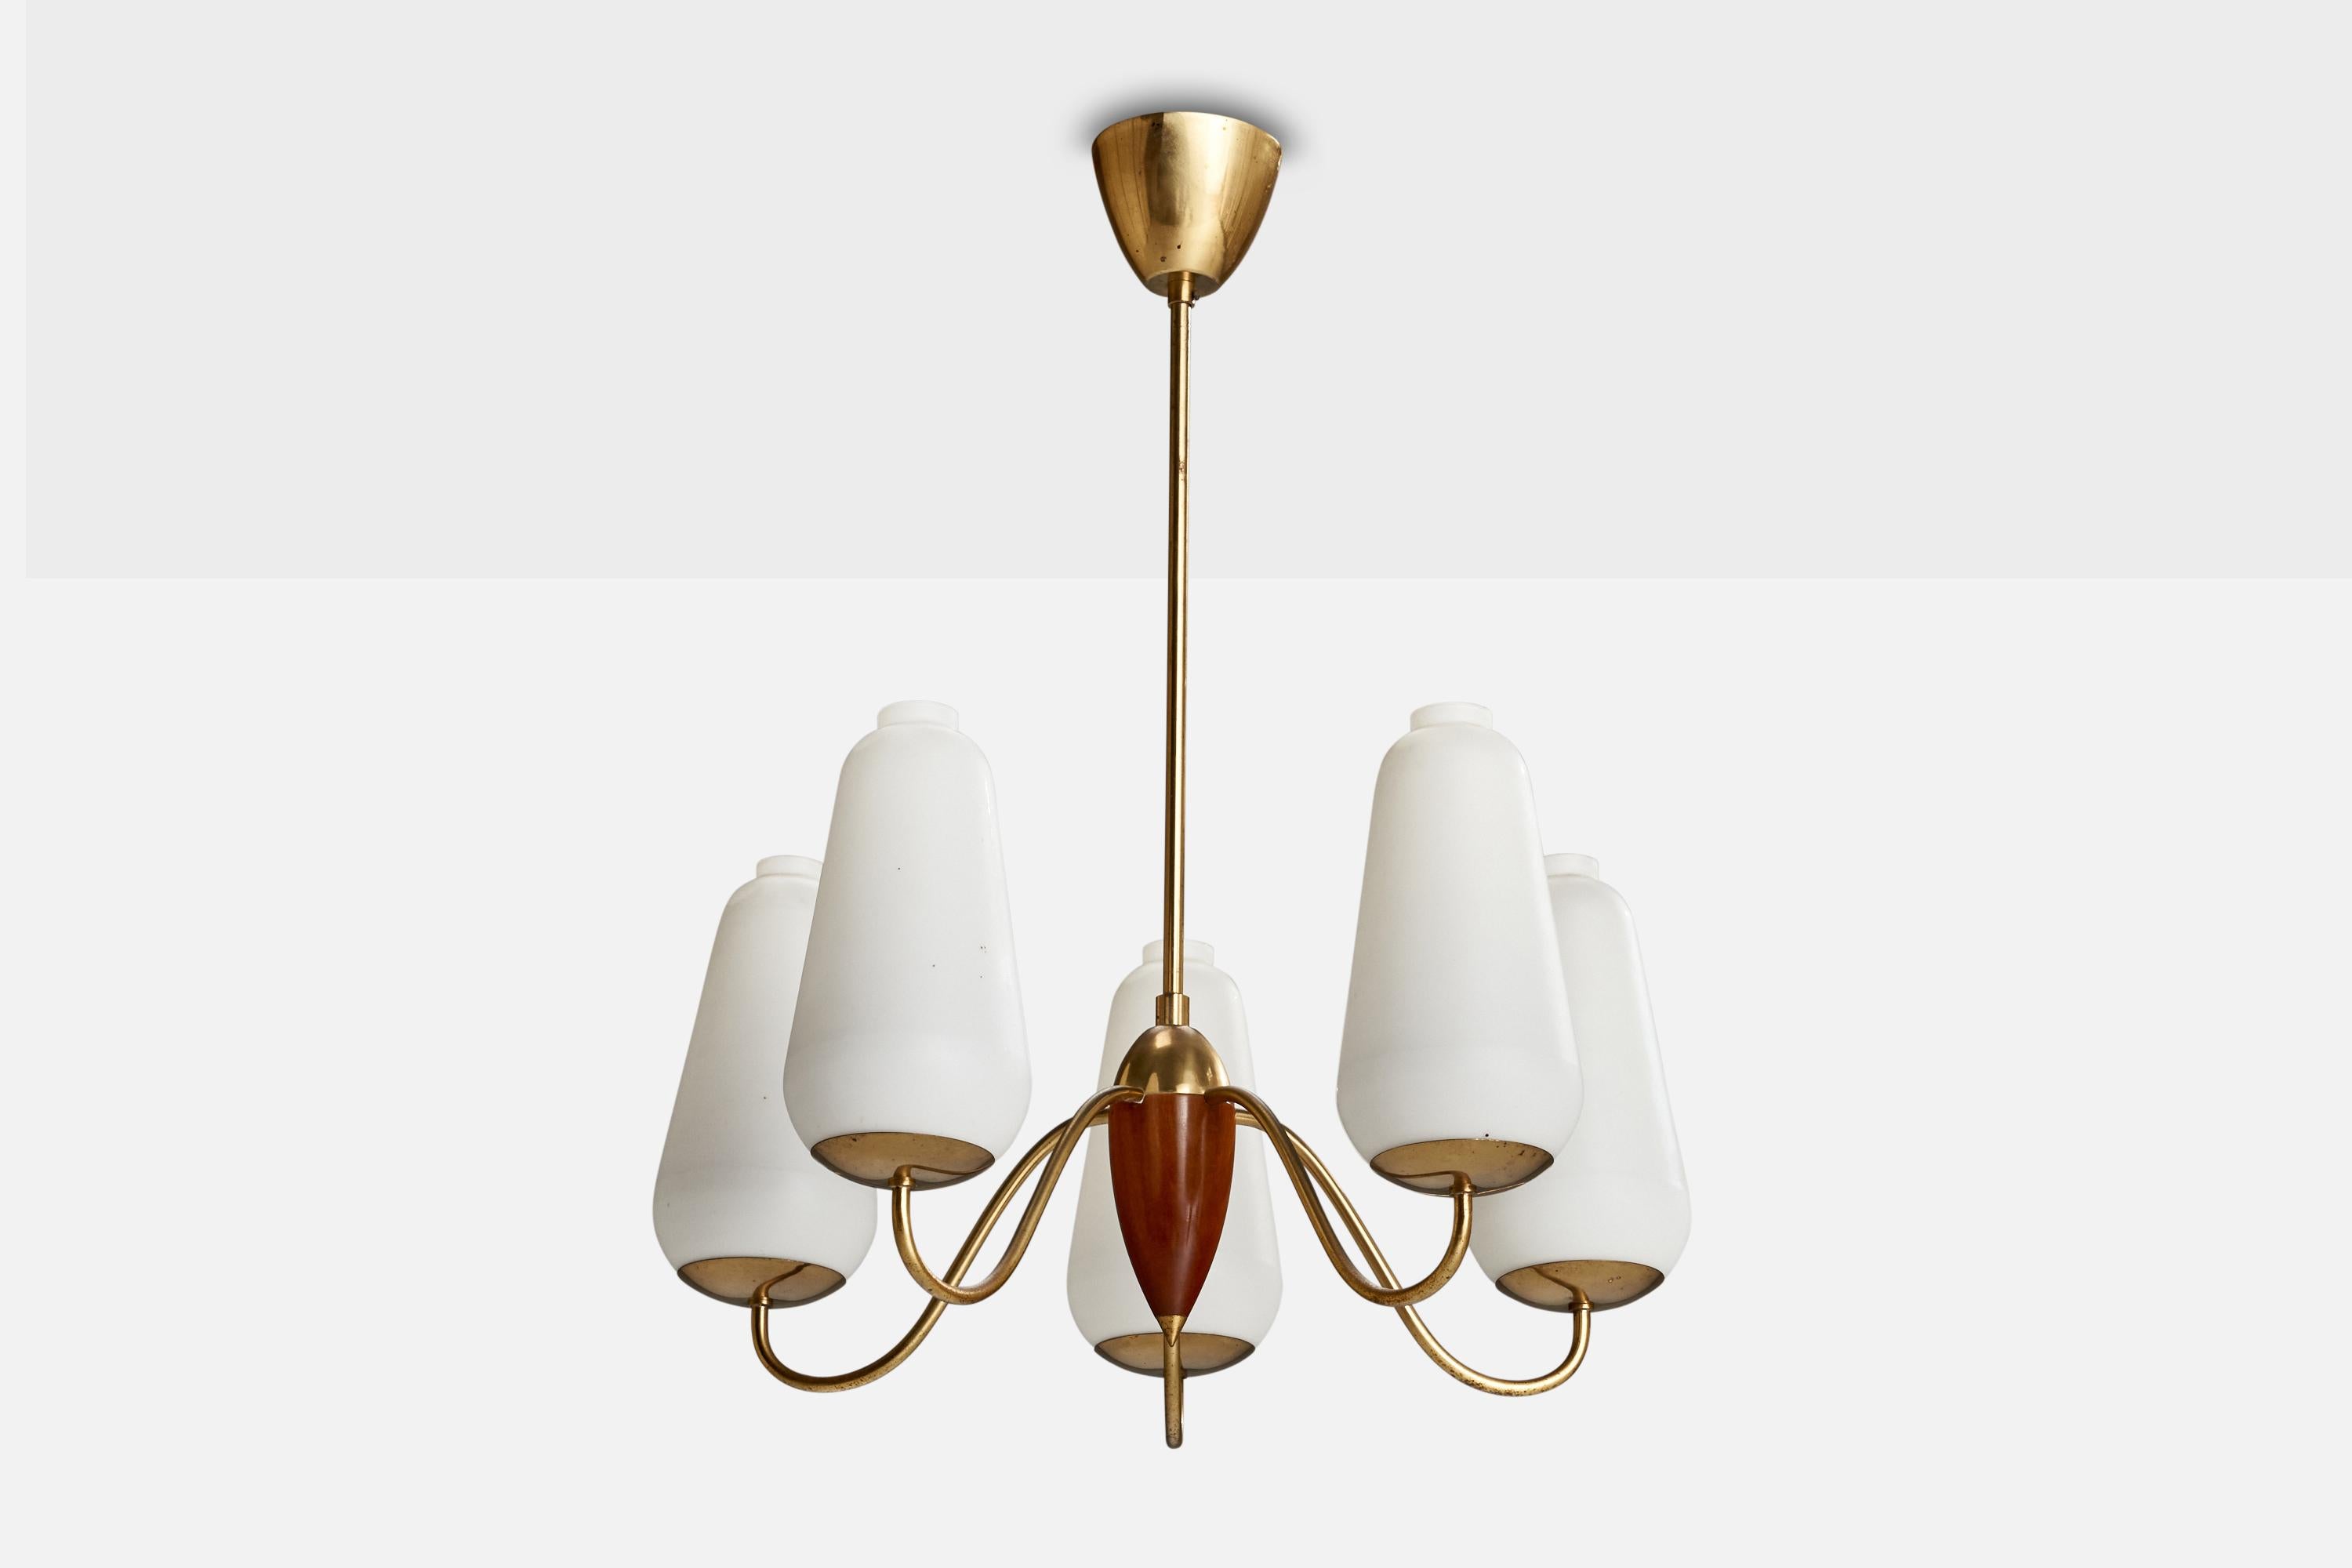 A brass, stained wood and opaline glass chandelier designed and produced in Sweden, c. 1940s.

Dimensions of canopy (inches): 3.21” H x 3.66” Diameter
Socket takes standard E-26 bulbs. 5 socket.There is no maximum wattage stated on the fixture. All